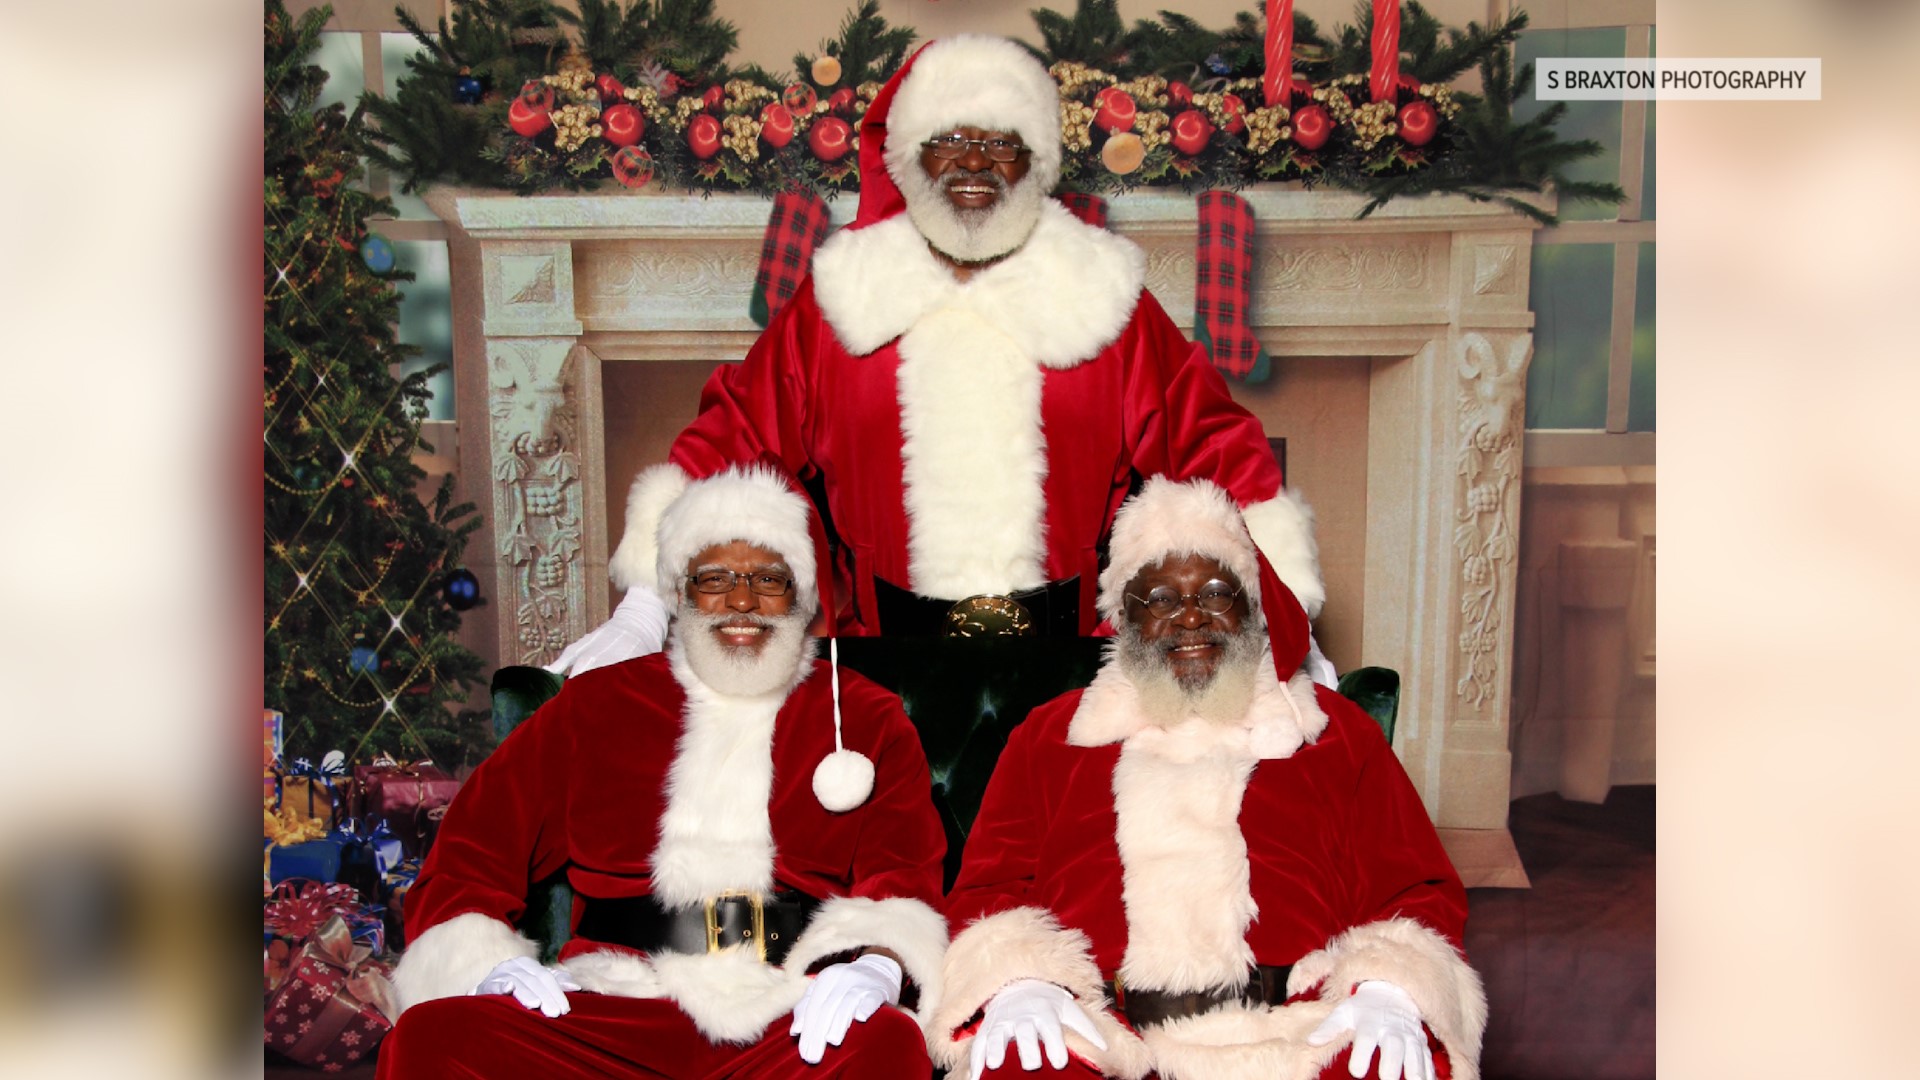 According to a survey by the nonprofit, National Santa, white people make up 75% of Santas, while Black people account for less than 1%.